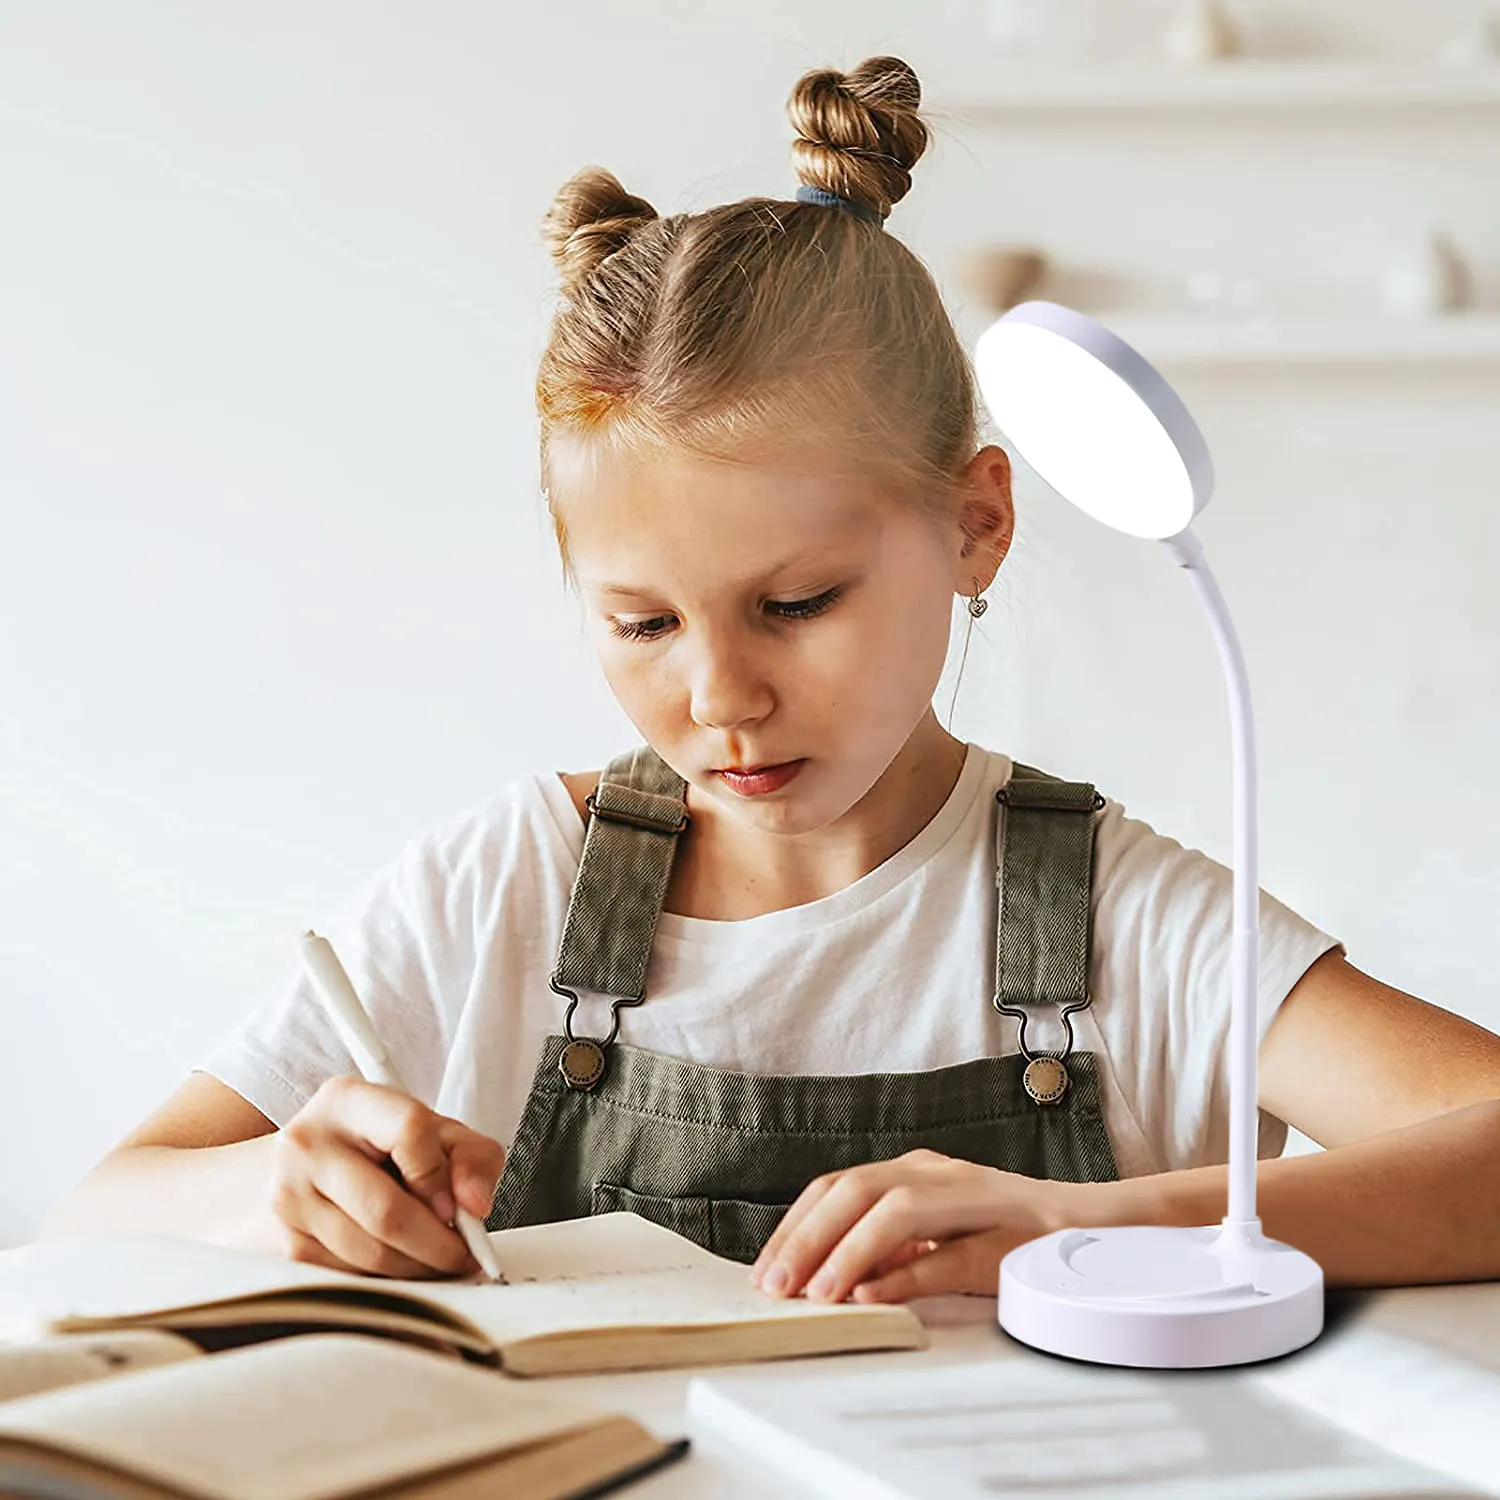 Turn freely usb charging tcontemporary house children study lamp led rechargeable table bright desk lamp